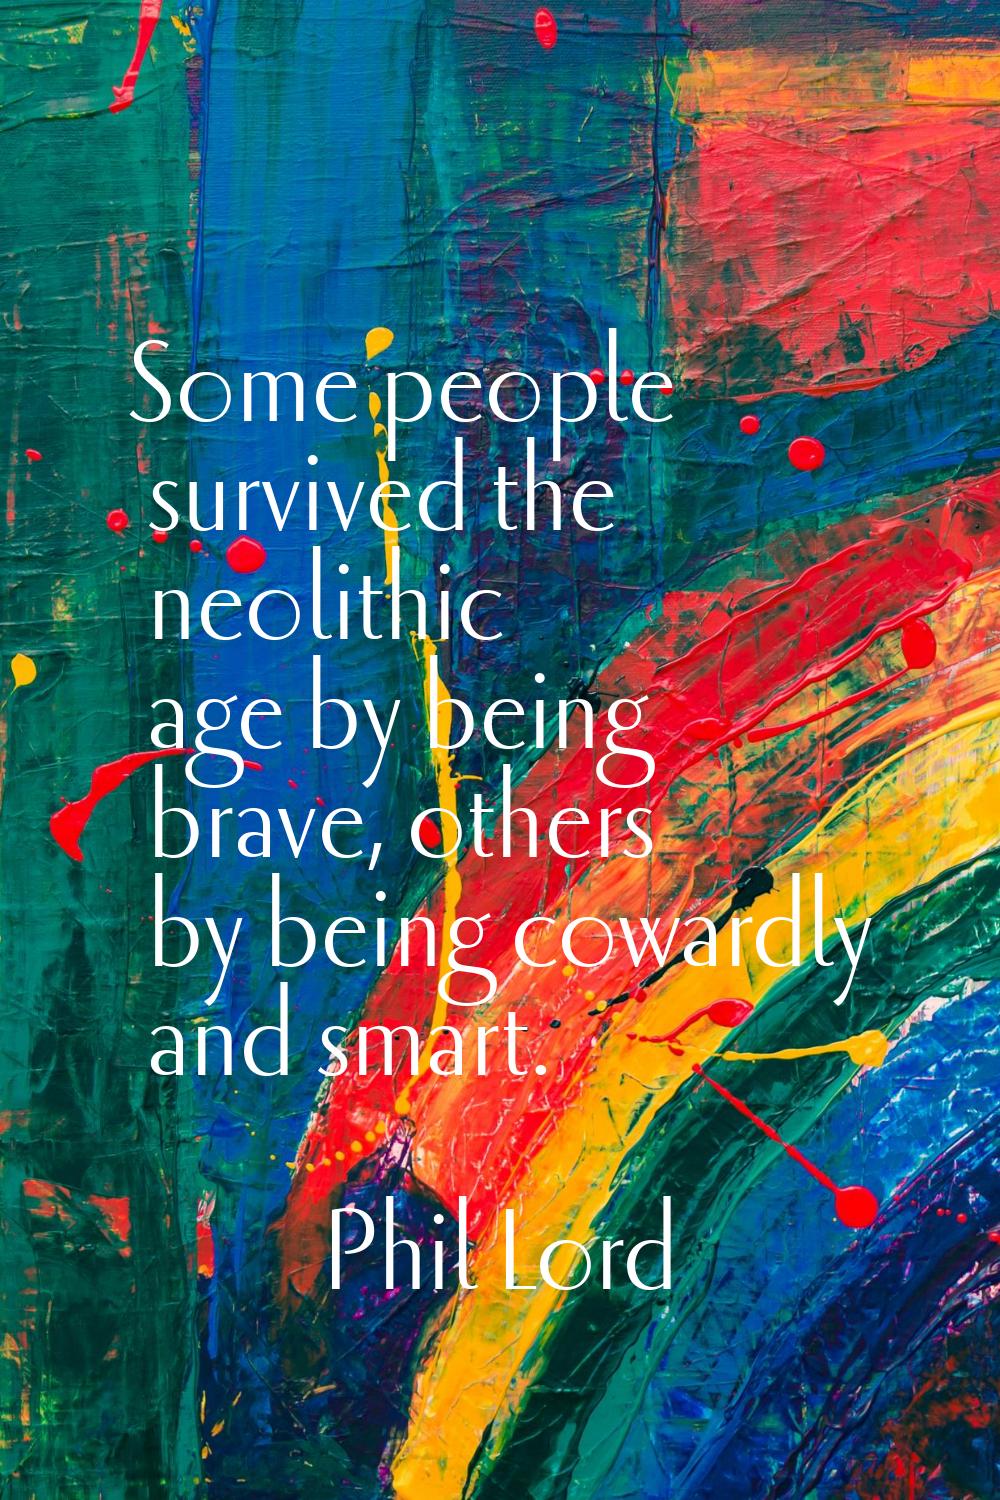 Some people survived the neolithic age by being brave, others by being cowardly and smart.